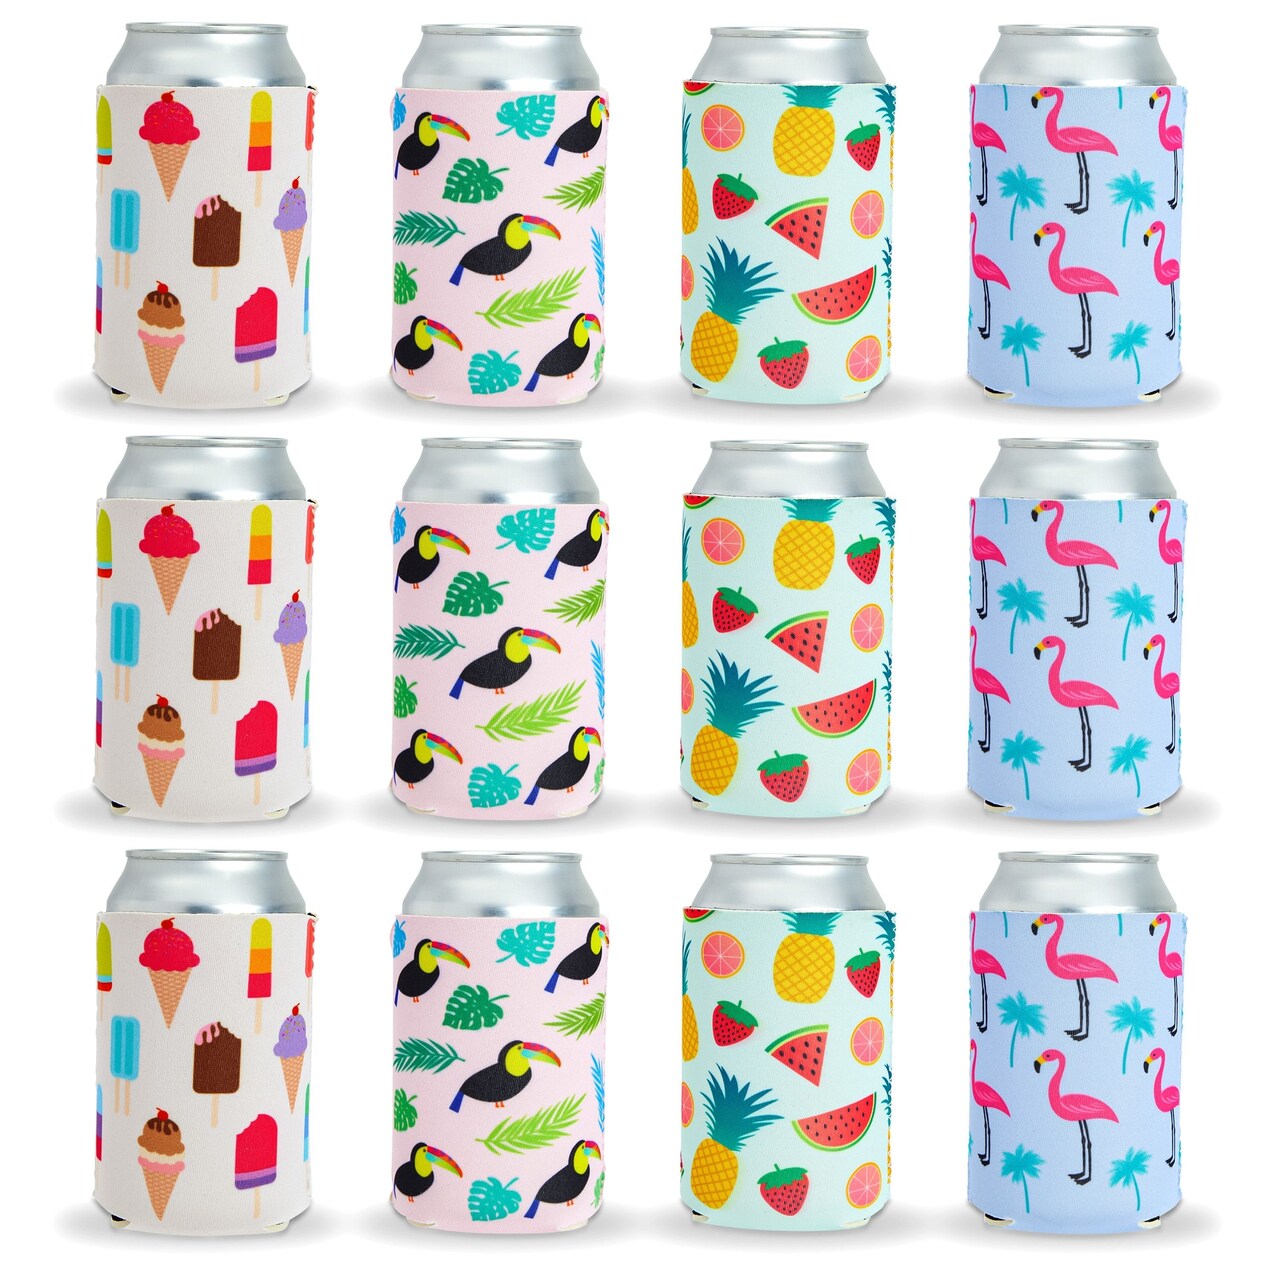 12 Pack Tropical Neoprene Can Cooler Sleeves for Beer, Bottles, Soft Drinks, Soda Covers for Beach, Summer Pool Parties (4 Designs, 12 oz)